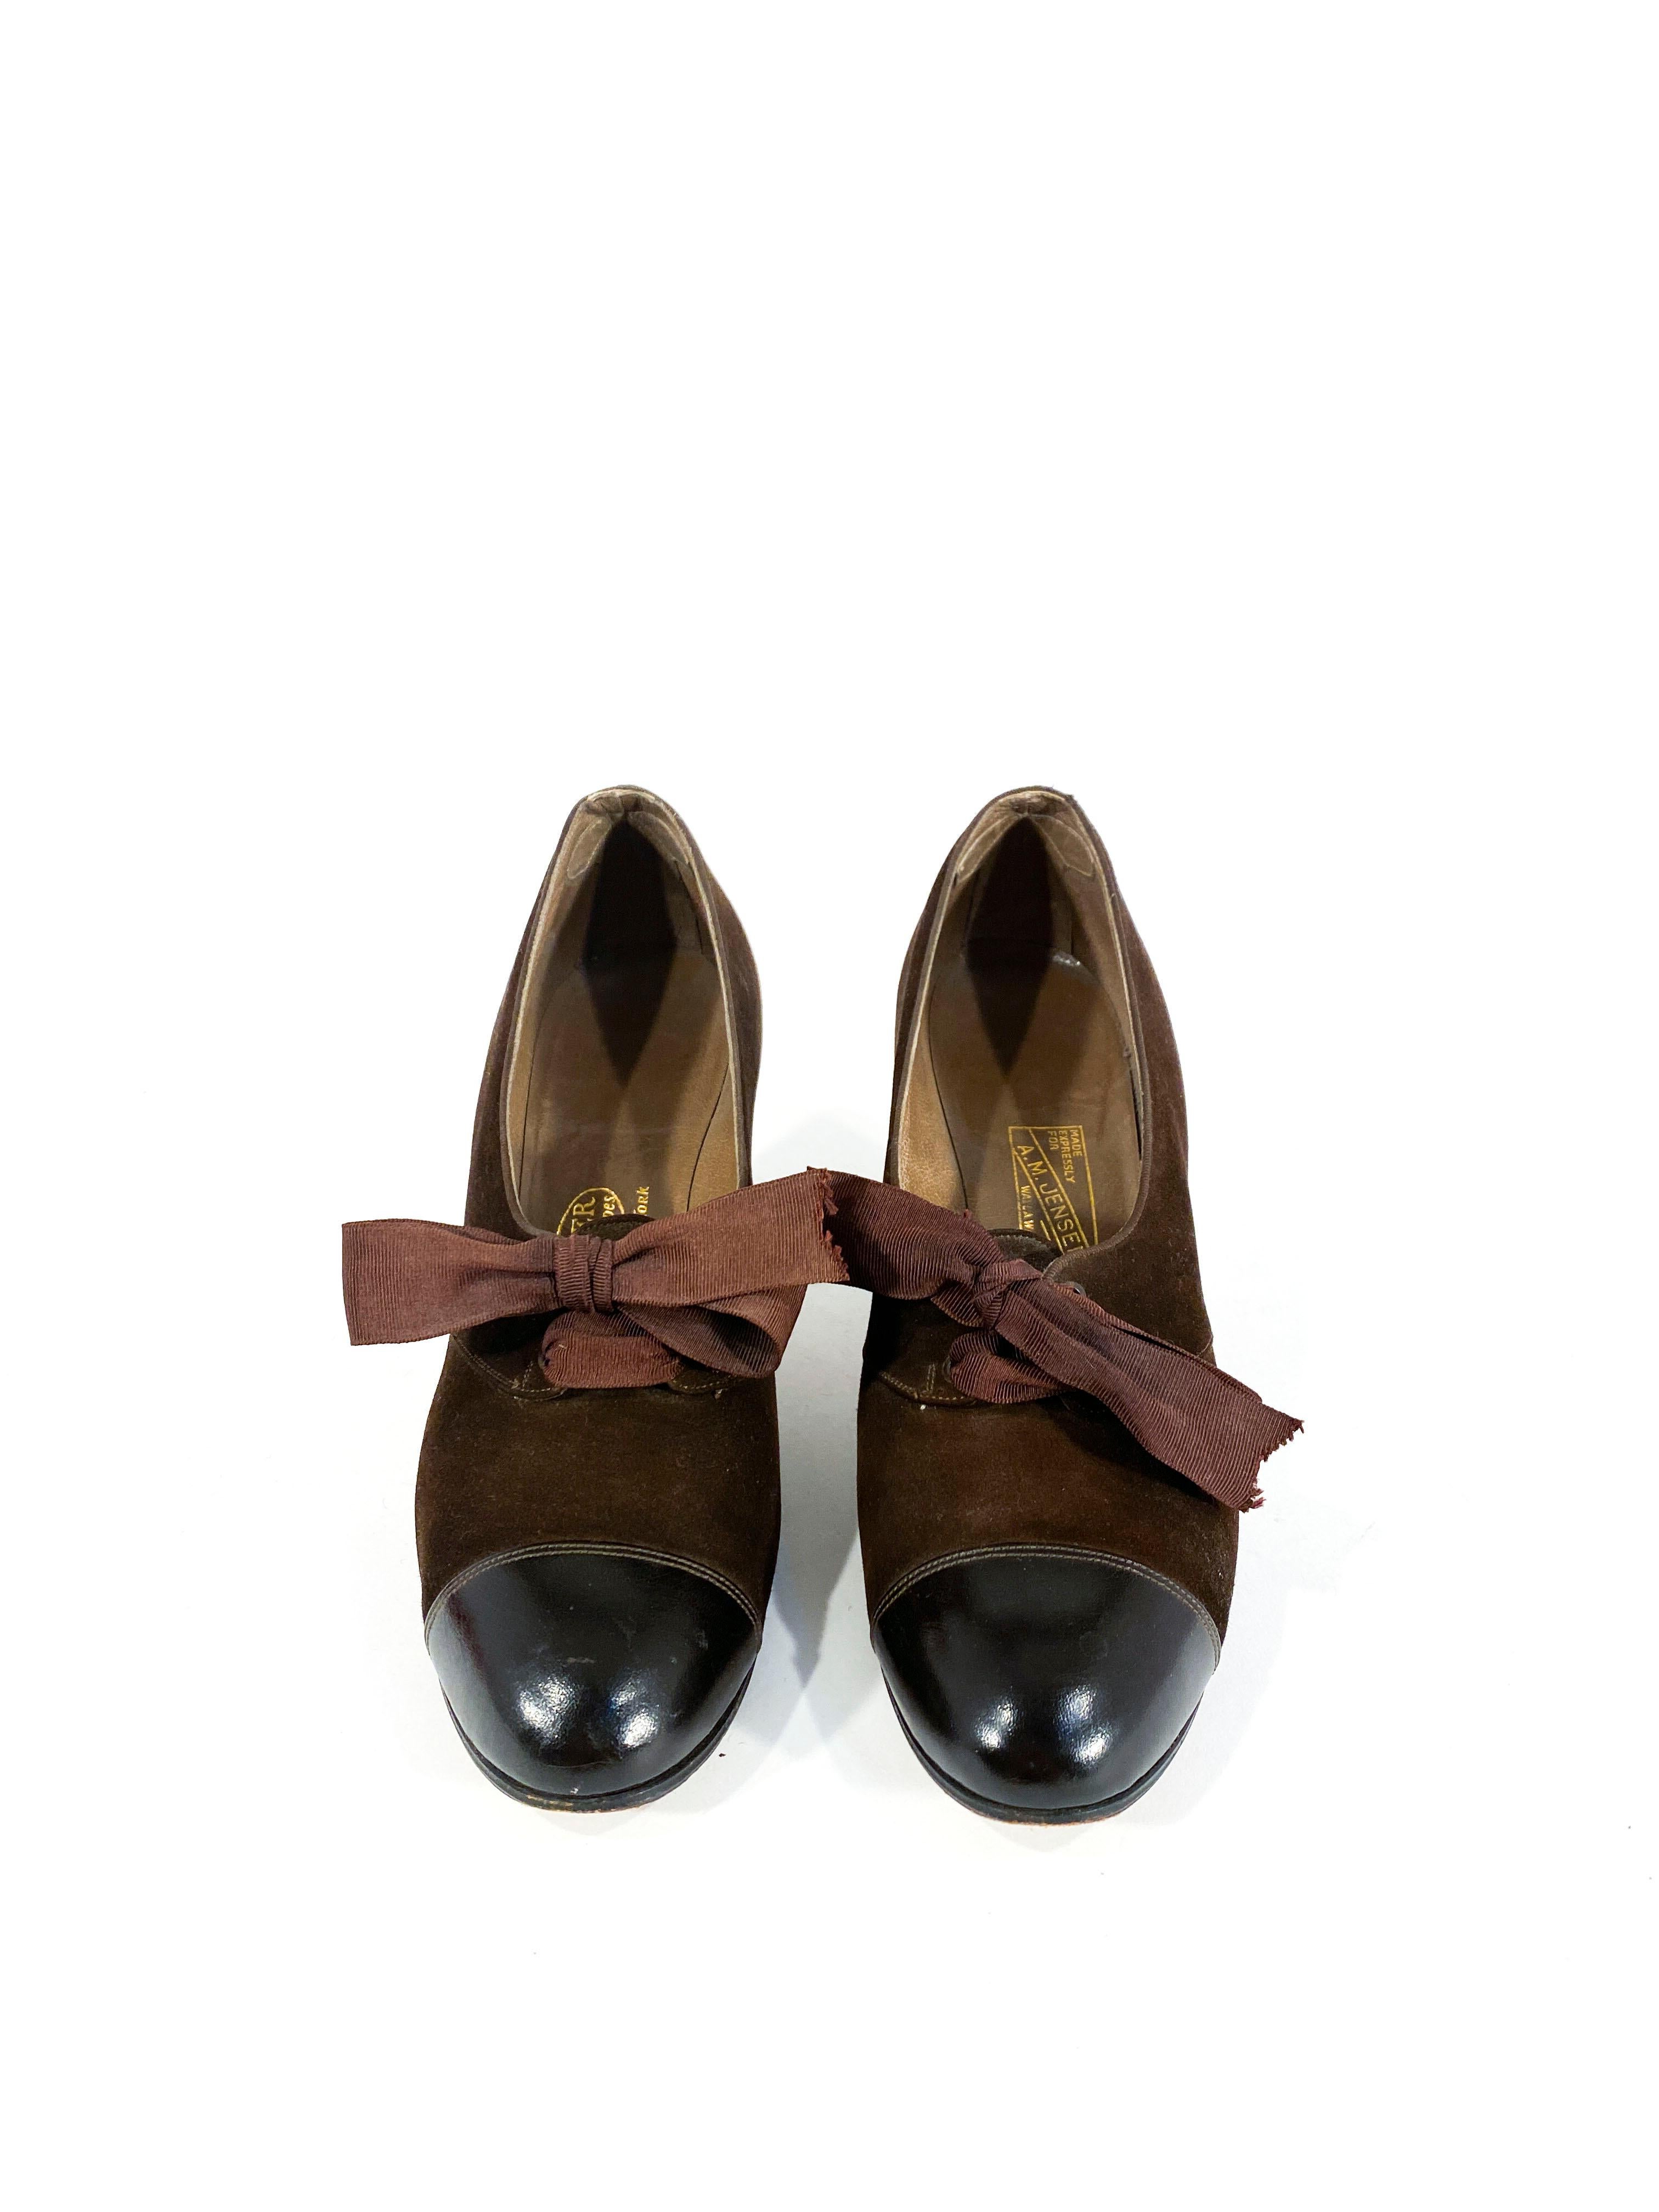 1930s Art Deco brown suede heels with smooth leather captor, grosgrain lace to tighten the top of the vamp, and a leather sole. The heels are 2.5 inches from the ground. 